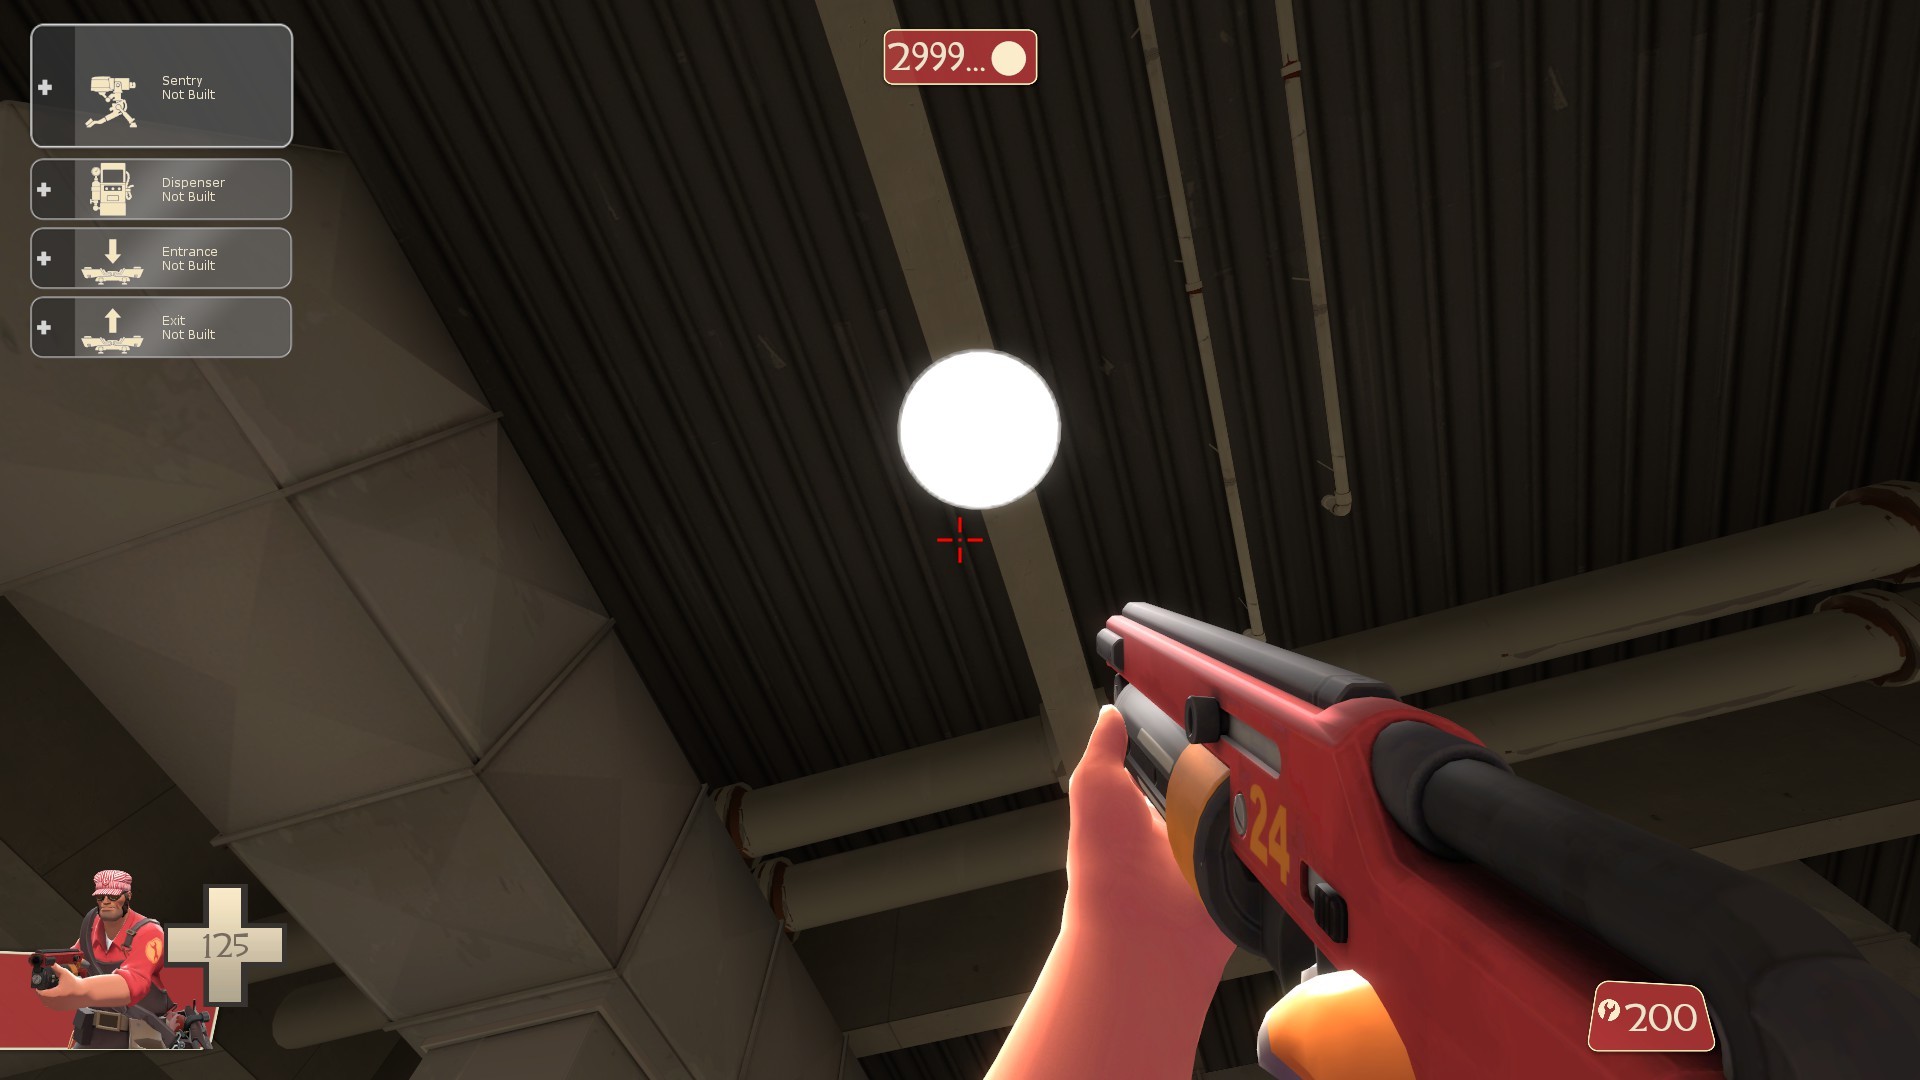 license does not enable window maker tf2